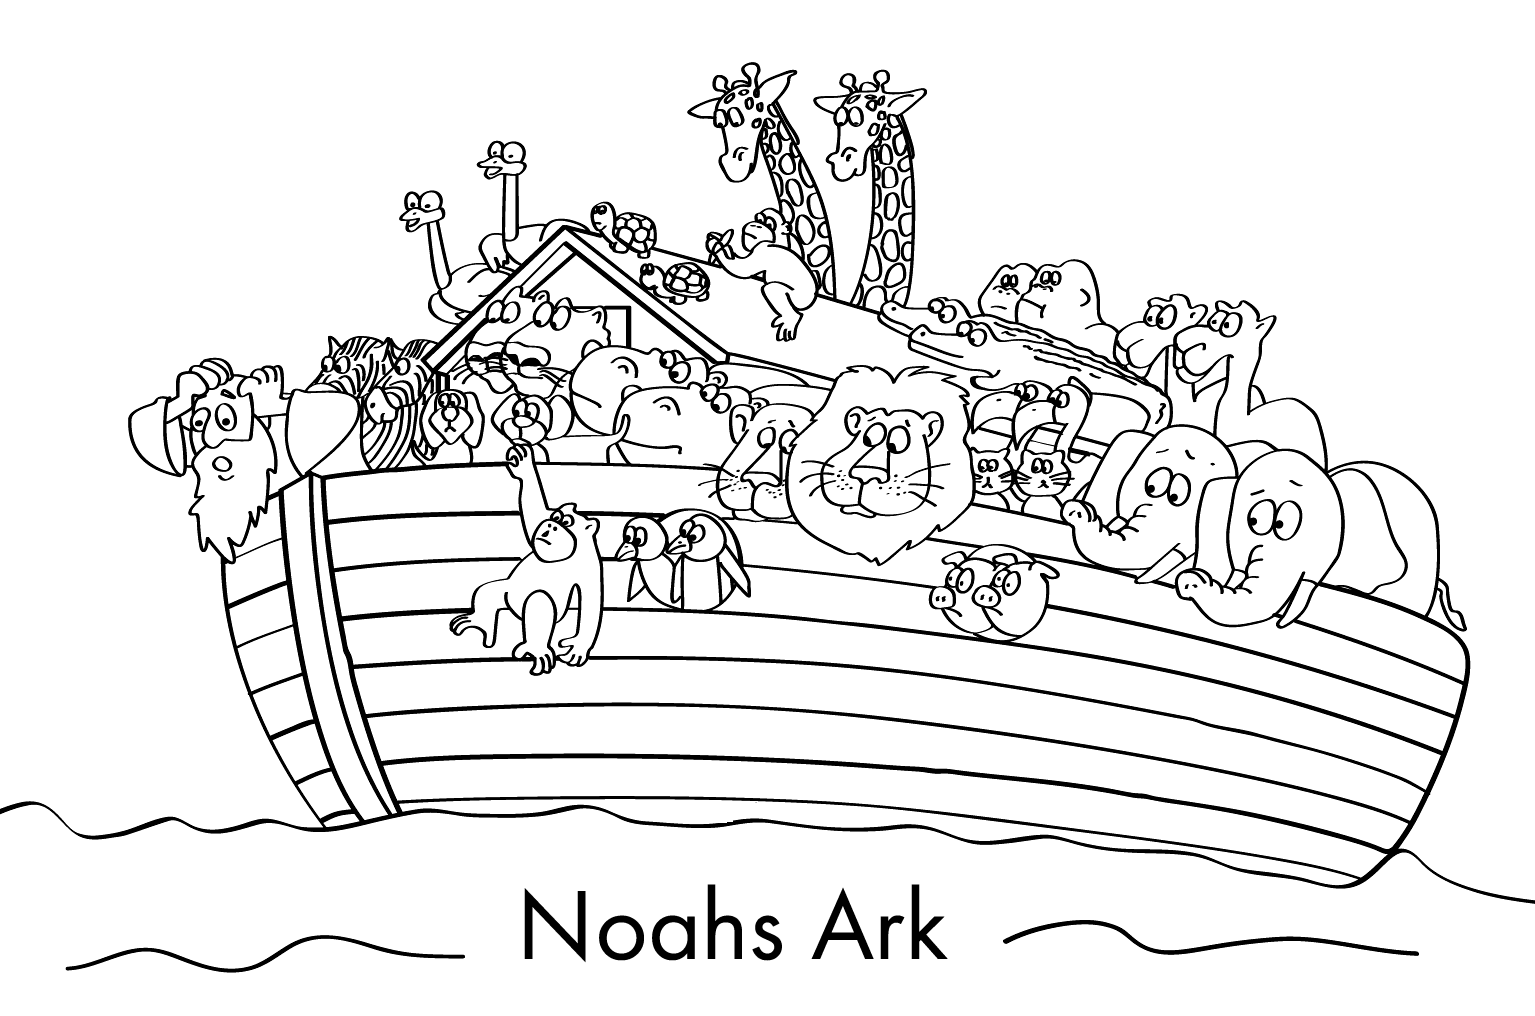 Noahs Ark Bible Story Coloring Page